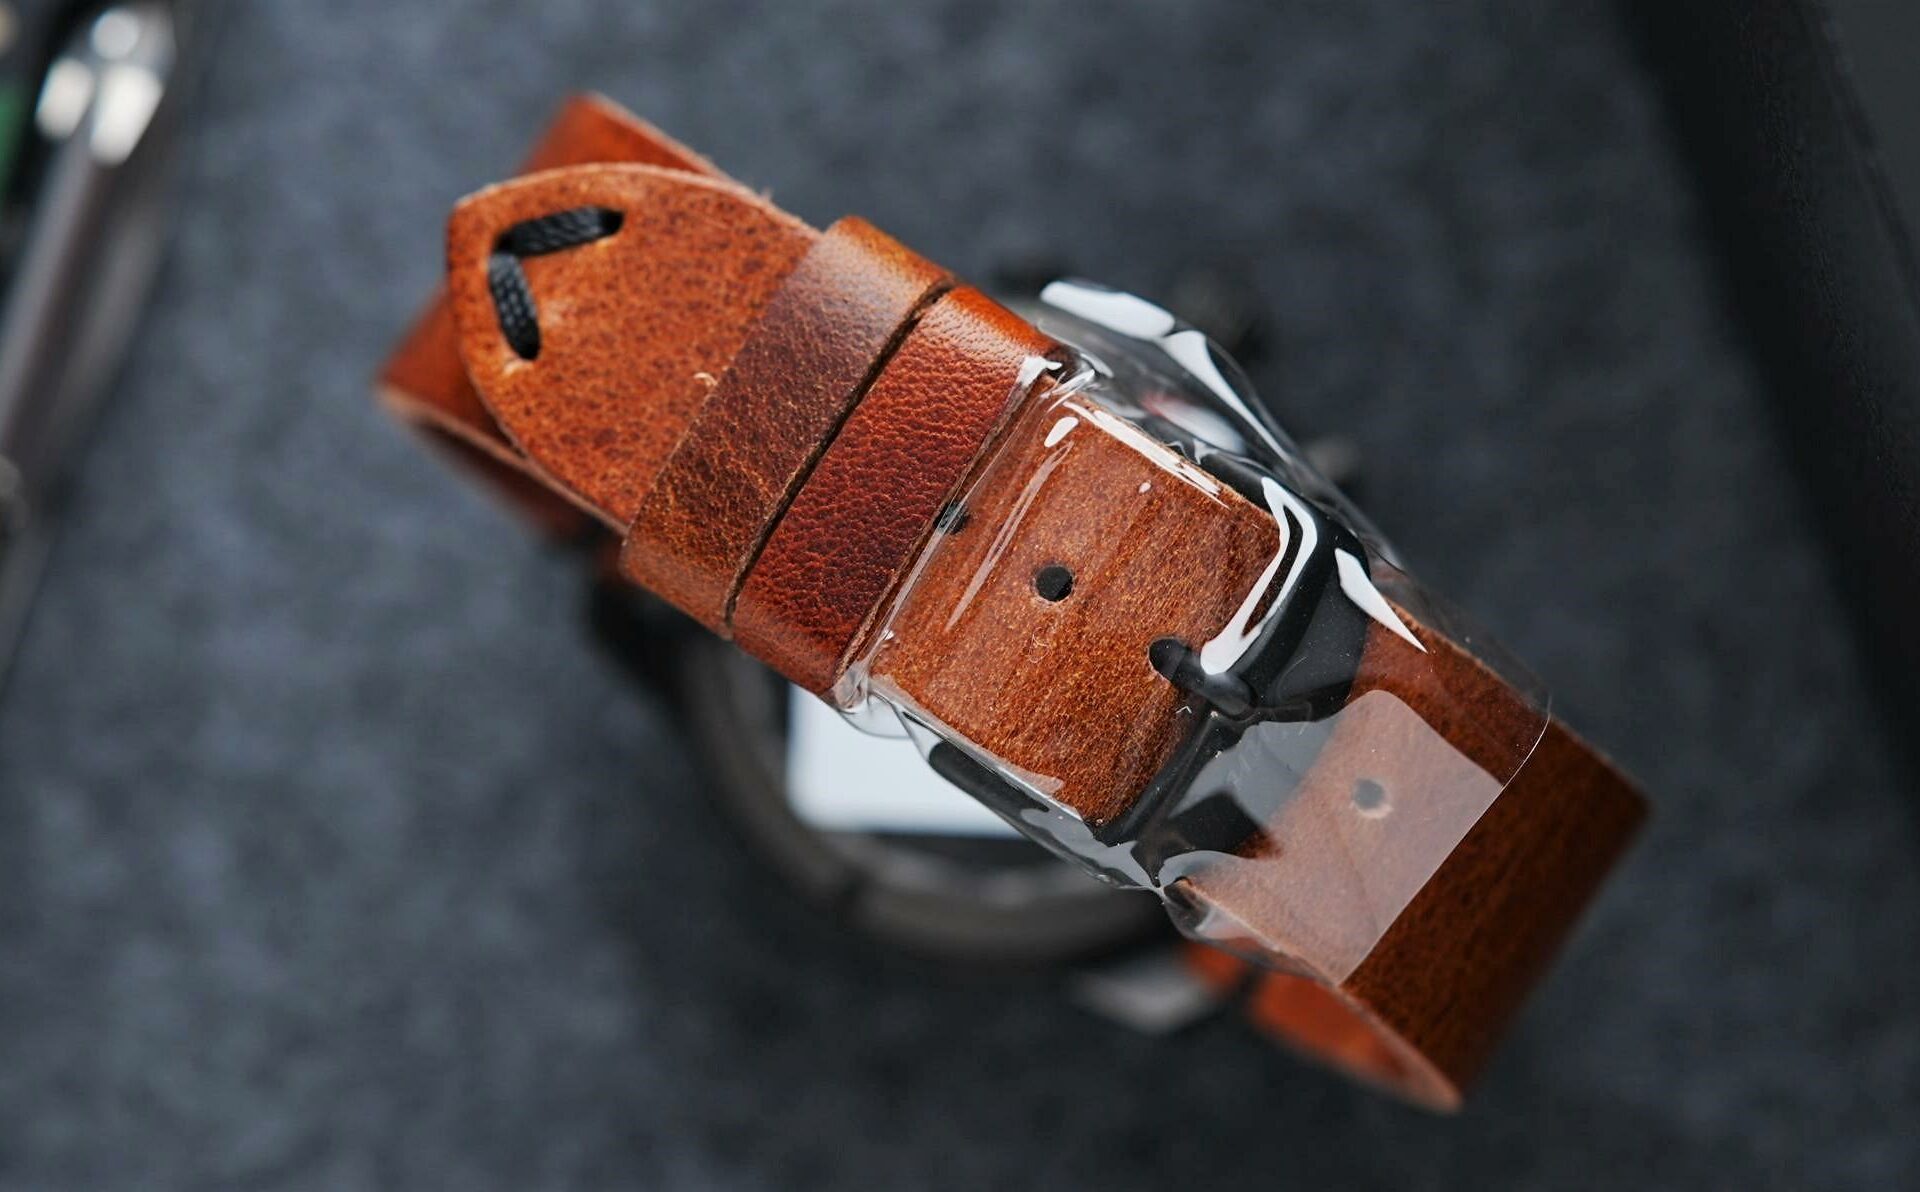 Sinn EZM 1.1S Limited Edition 500 strap and buckle new encased in plastic.